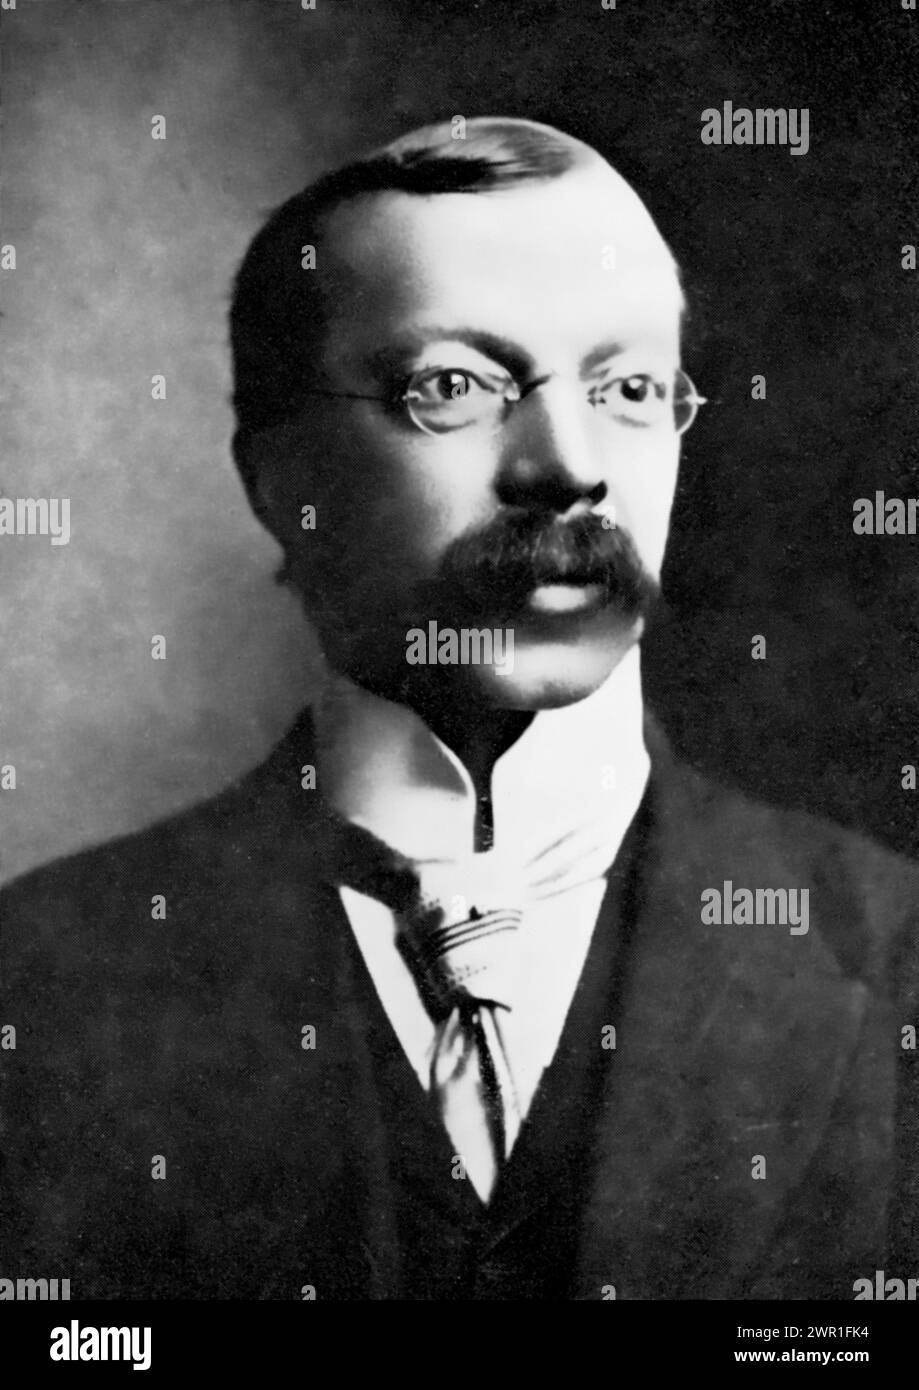 Hawley Harvey Crippen (Dr. Crippen), c1910. Hawley Harvey Crippen (1862-1910), was an American homeopath, ear and eye specialist and medicine dispenser who was hanged in Pentonville Prison, London, for the murder of his wife, Cora Henrietta Crippen. He was the first criminal to be captured with the aid of wireless telegraphy. Stock Photo